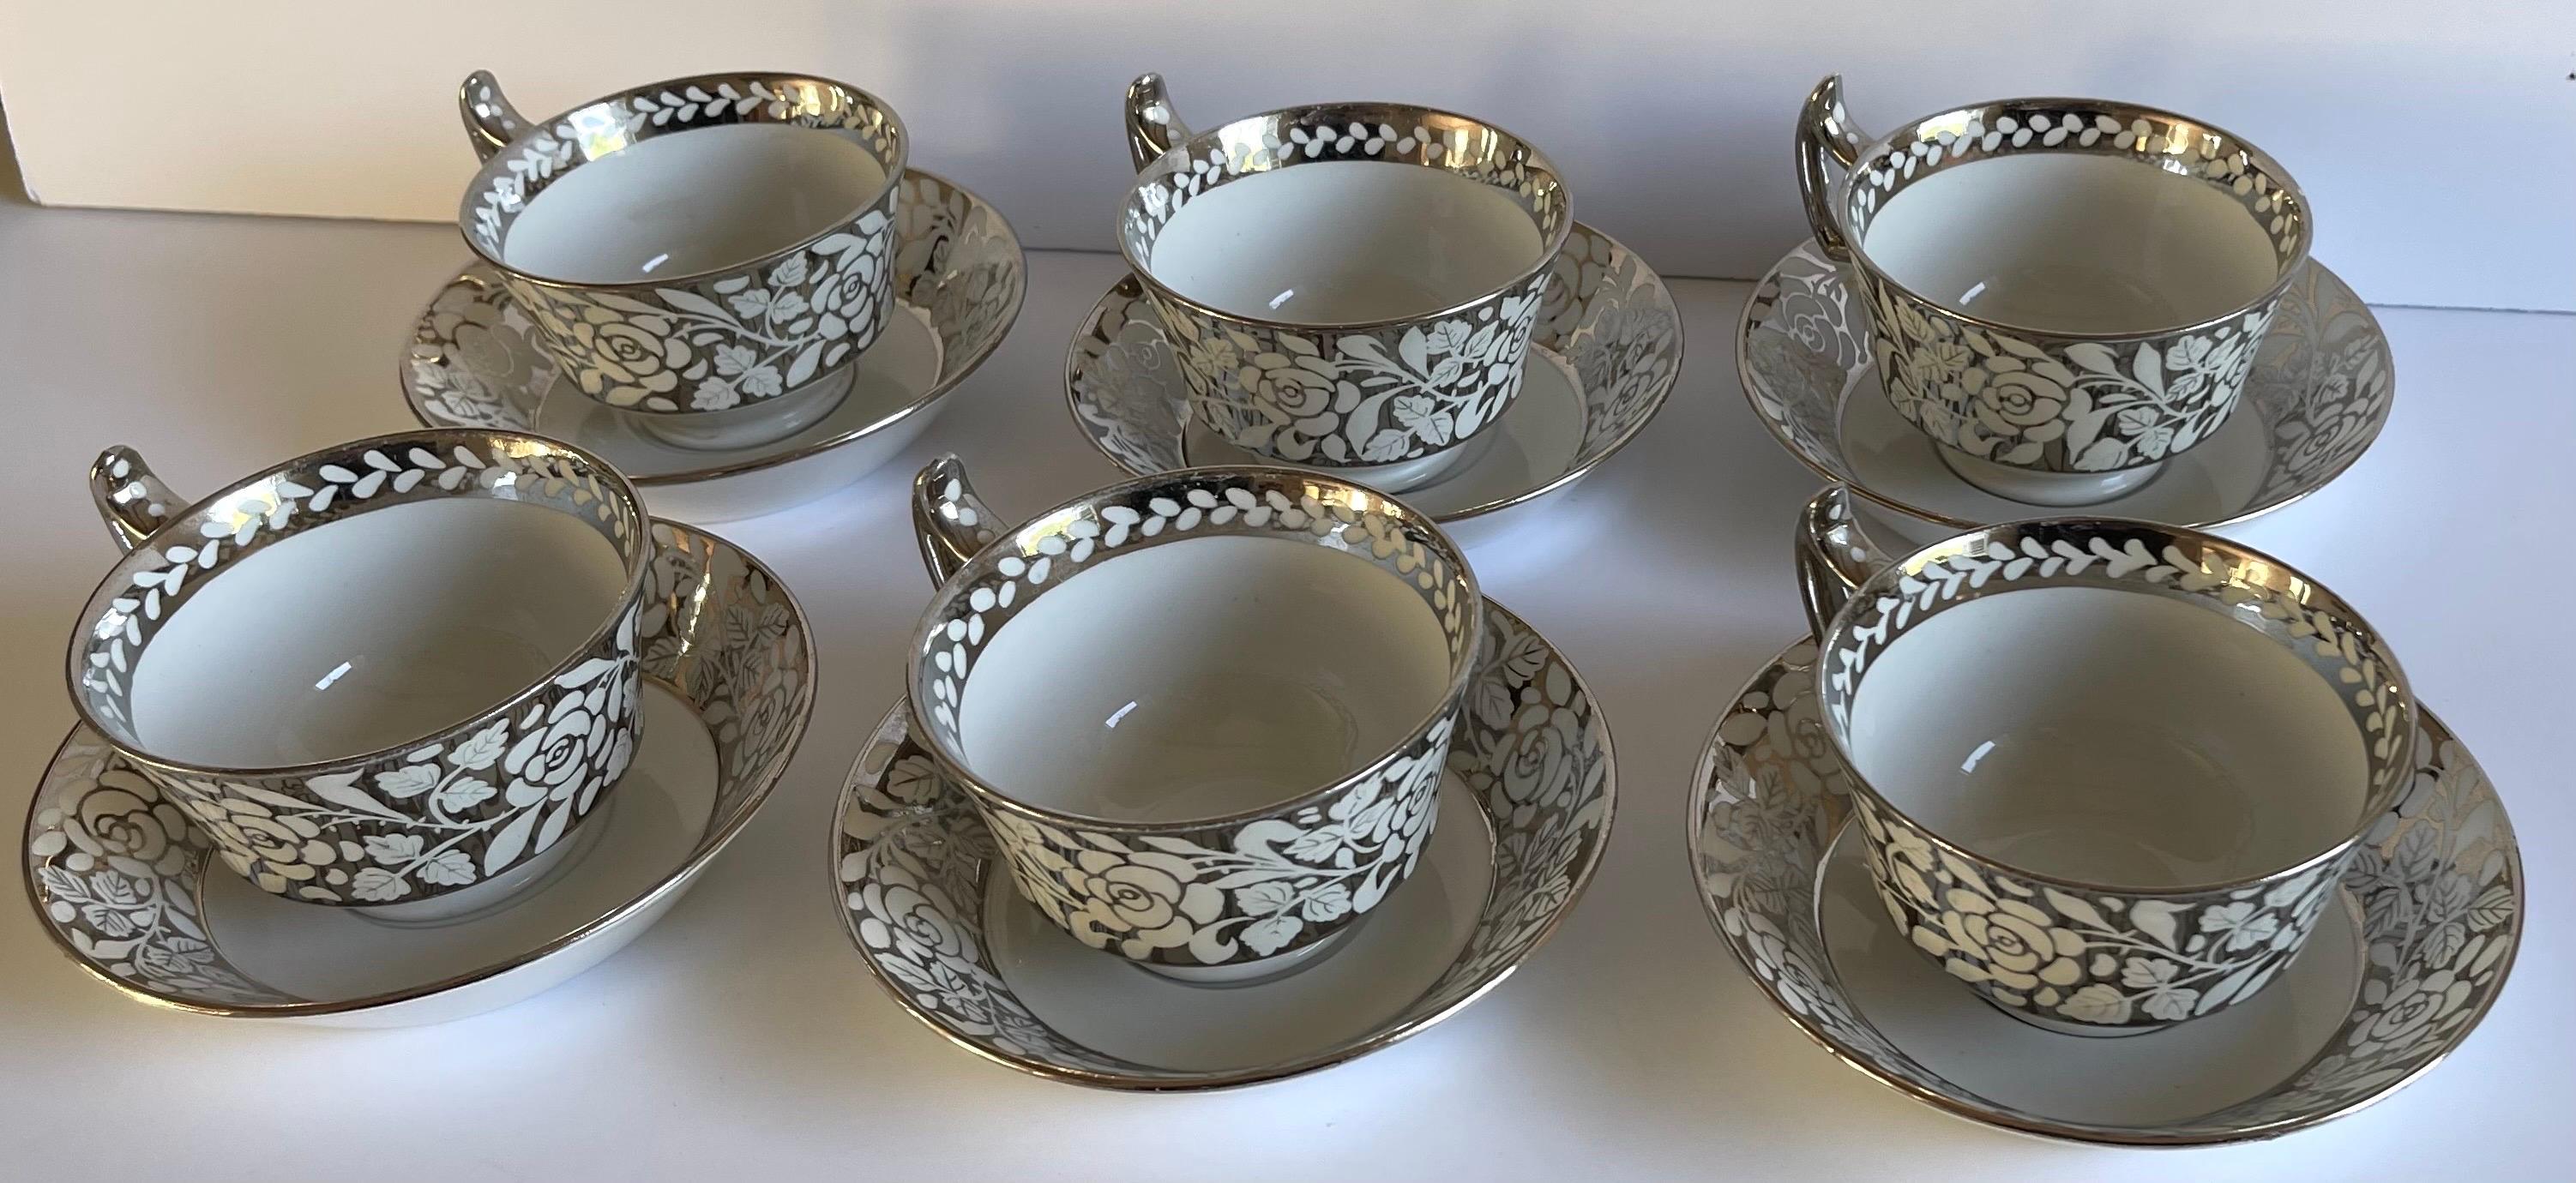 English 1930s Wedgwood Lustreware Tea Cups & Saucers, Set of 6 For Sale